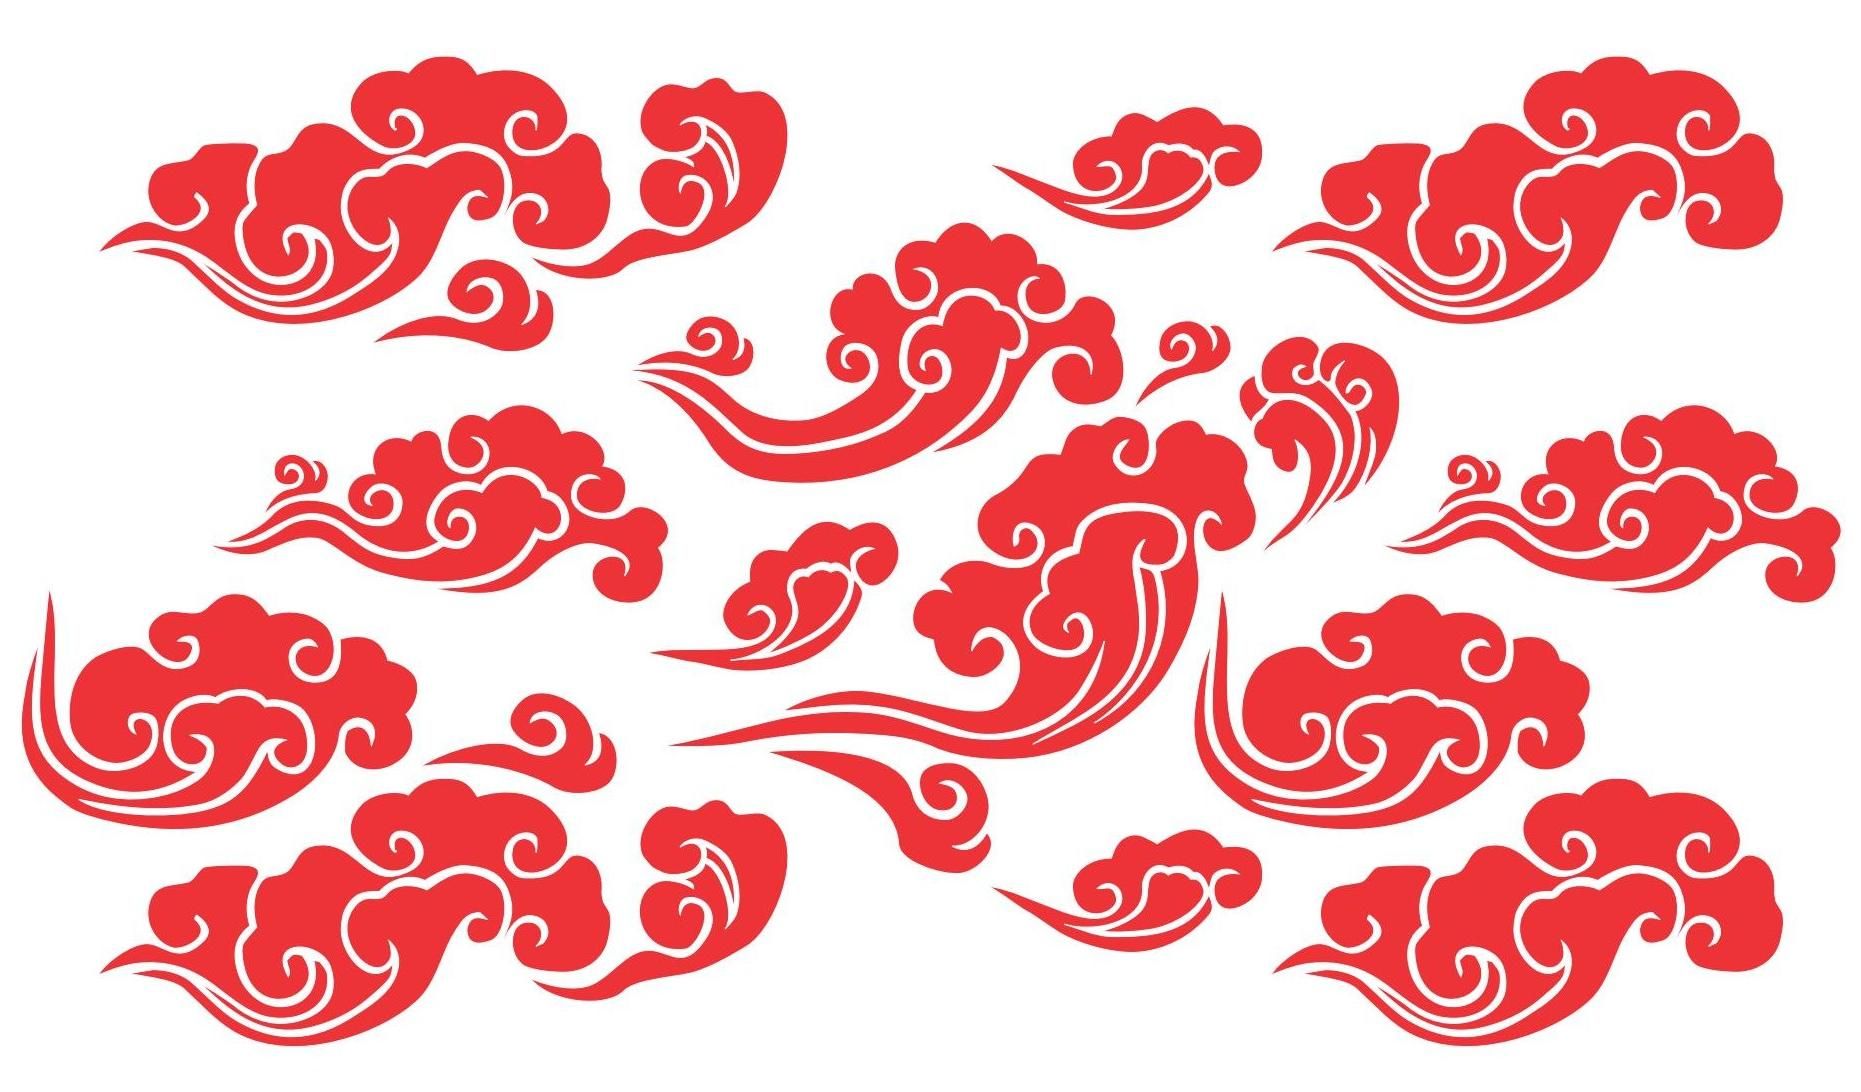 HD Chinese Vector Art Images » Free Vector Art, Images, Graphics.